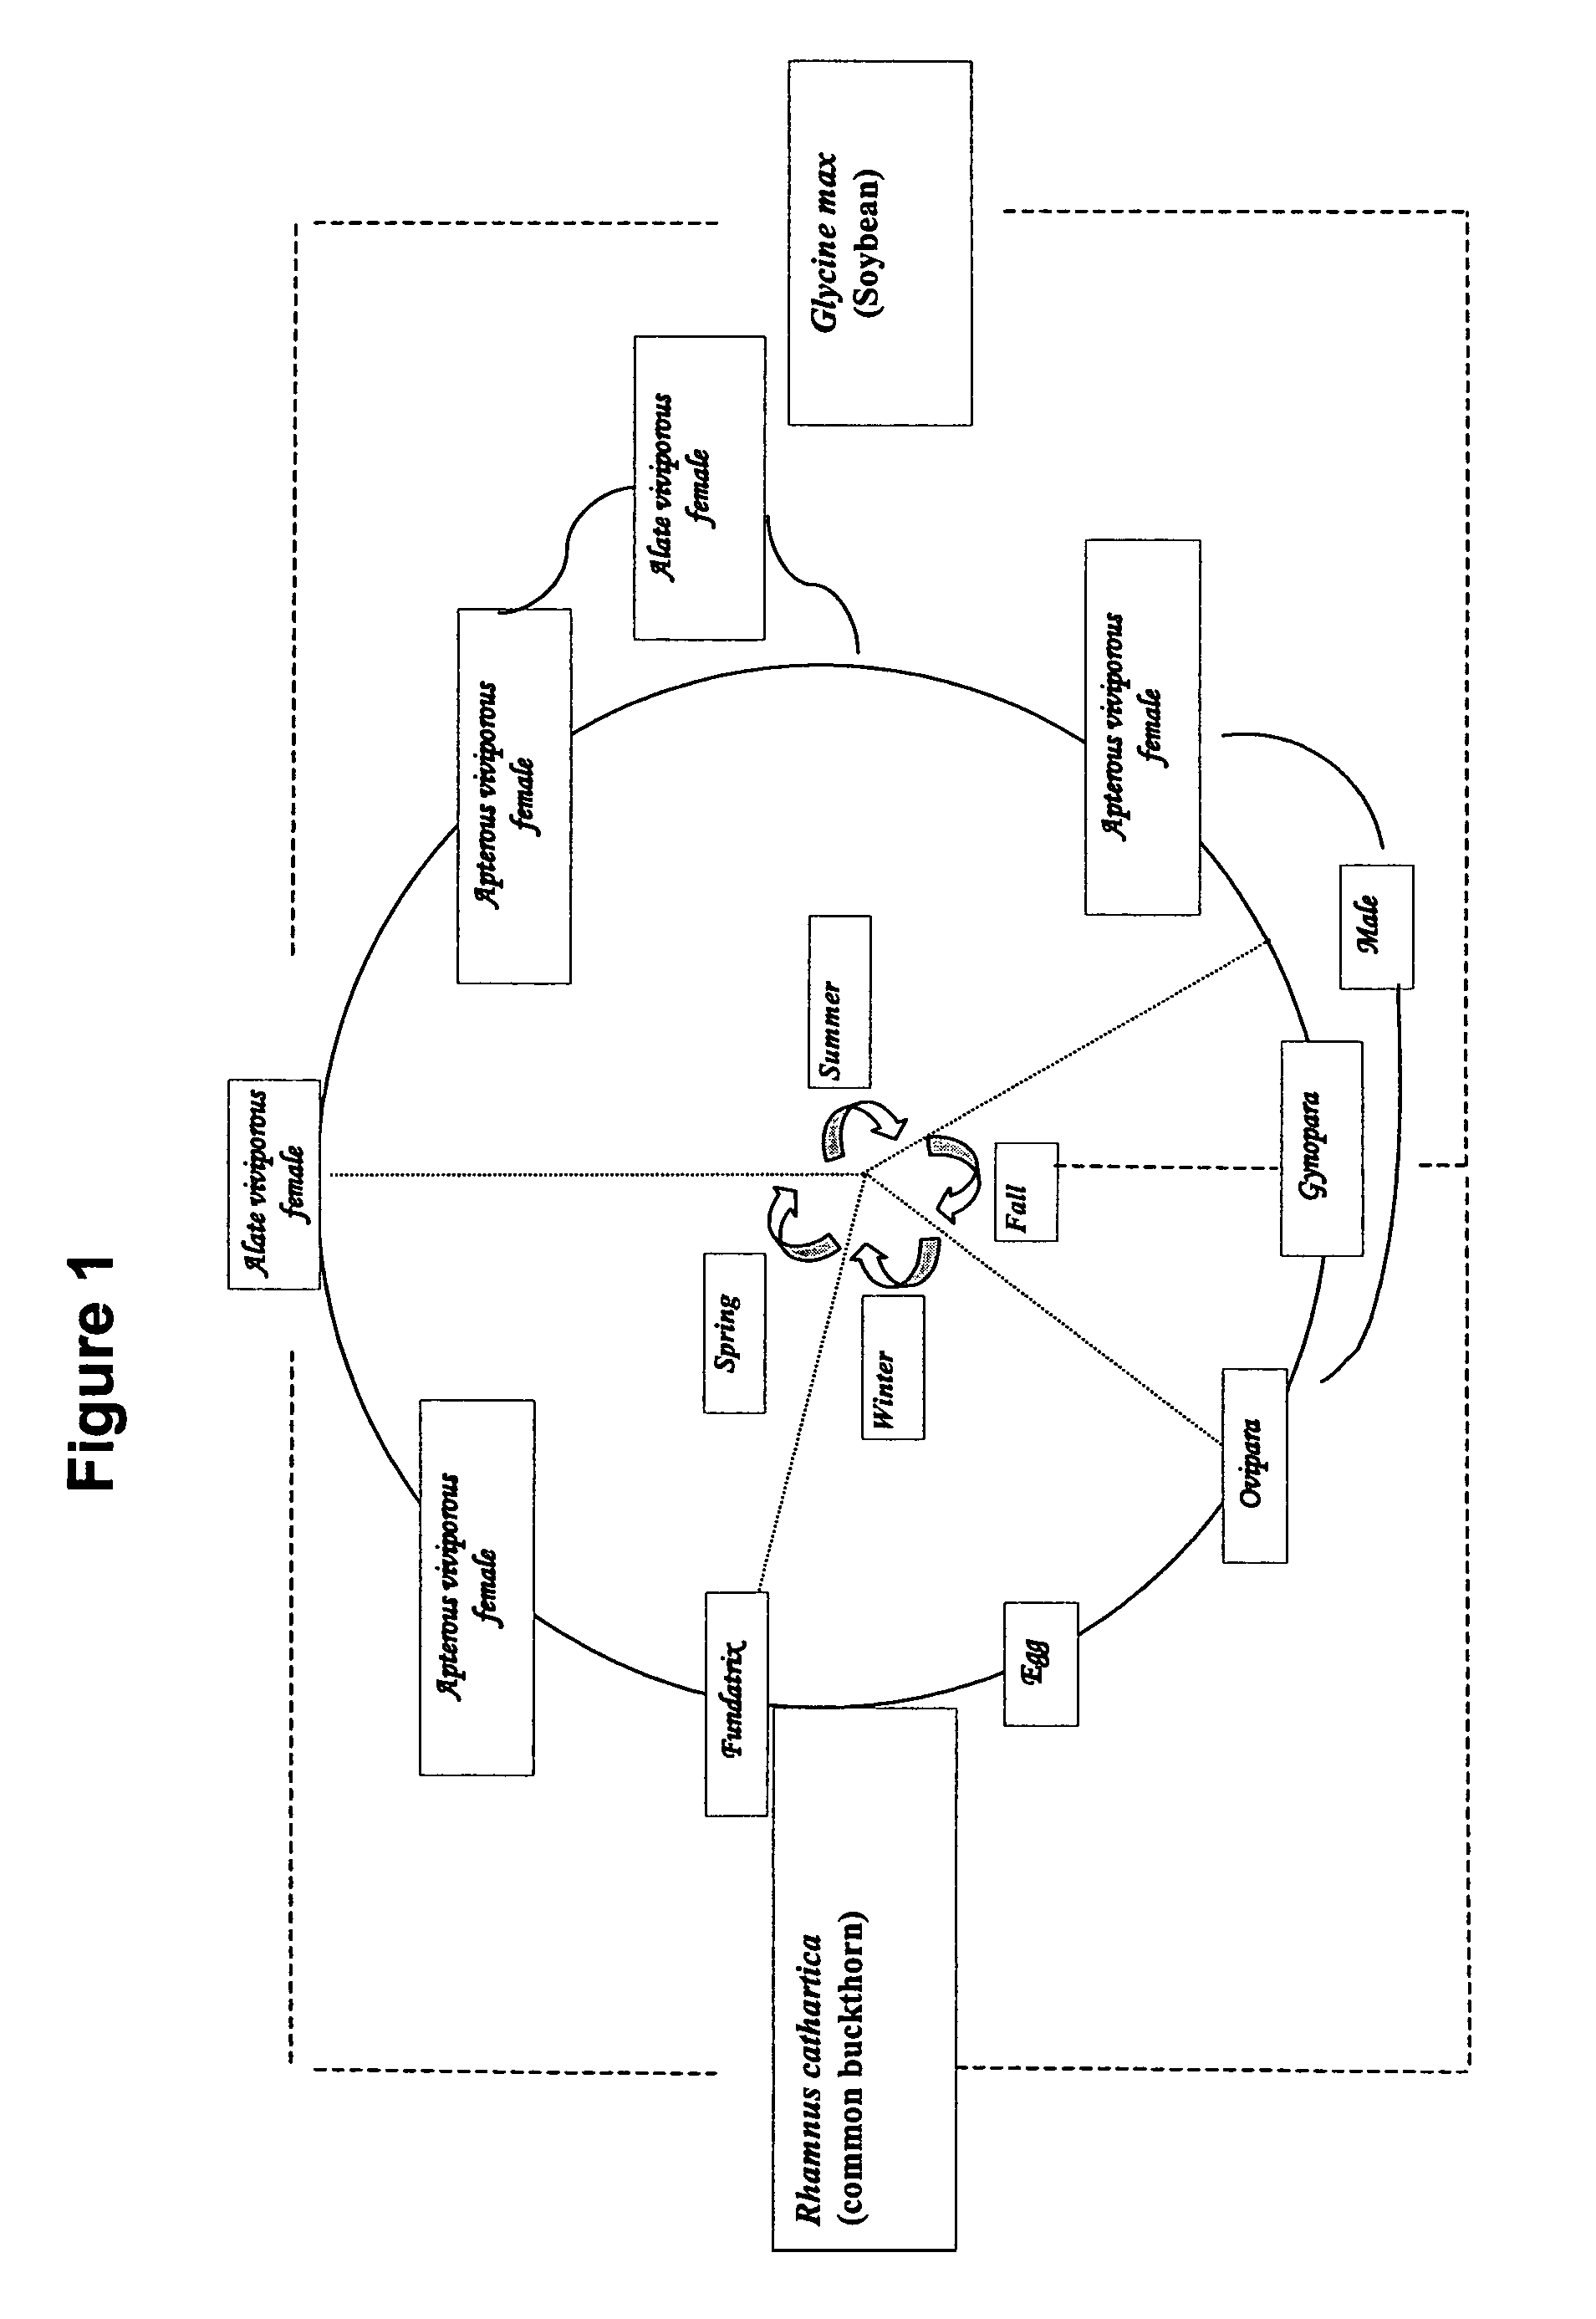 Method for soybean aphid population suppression and monitoring using aphid- and host-plant-associated semiochemical compositions